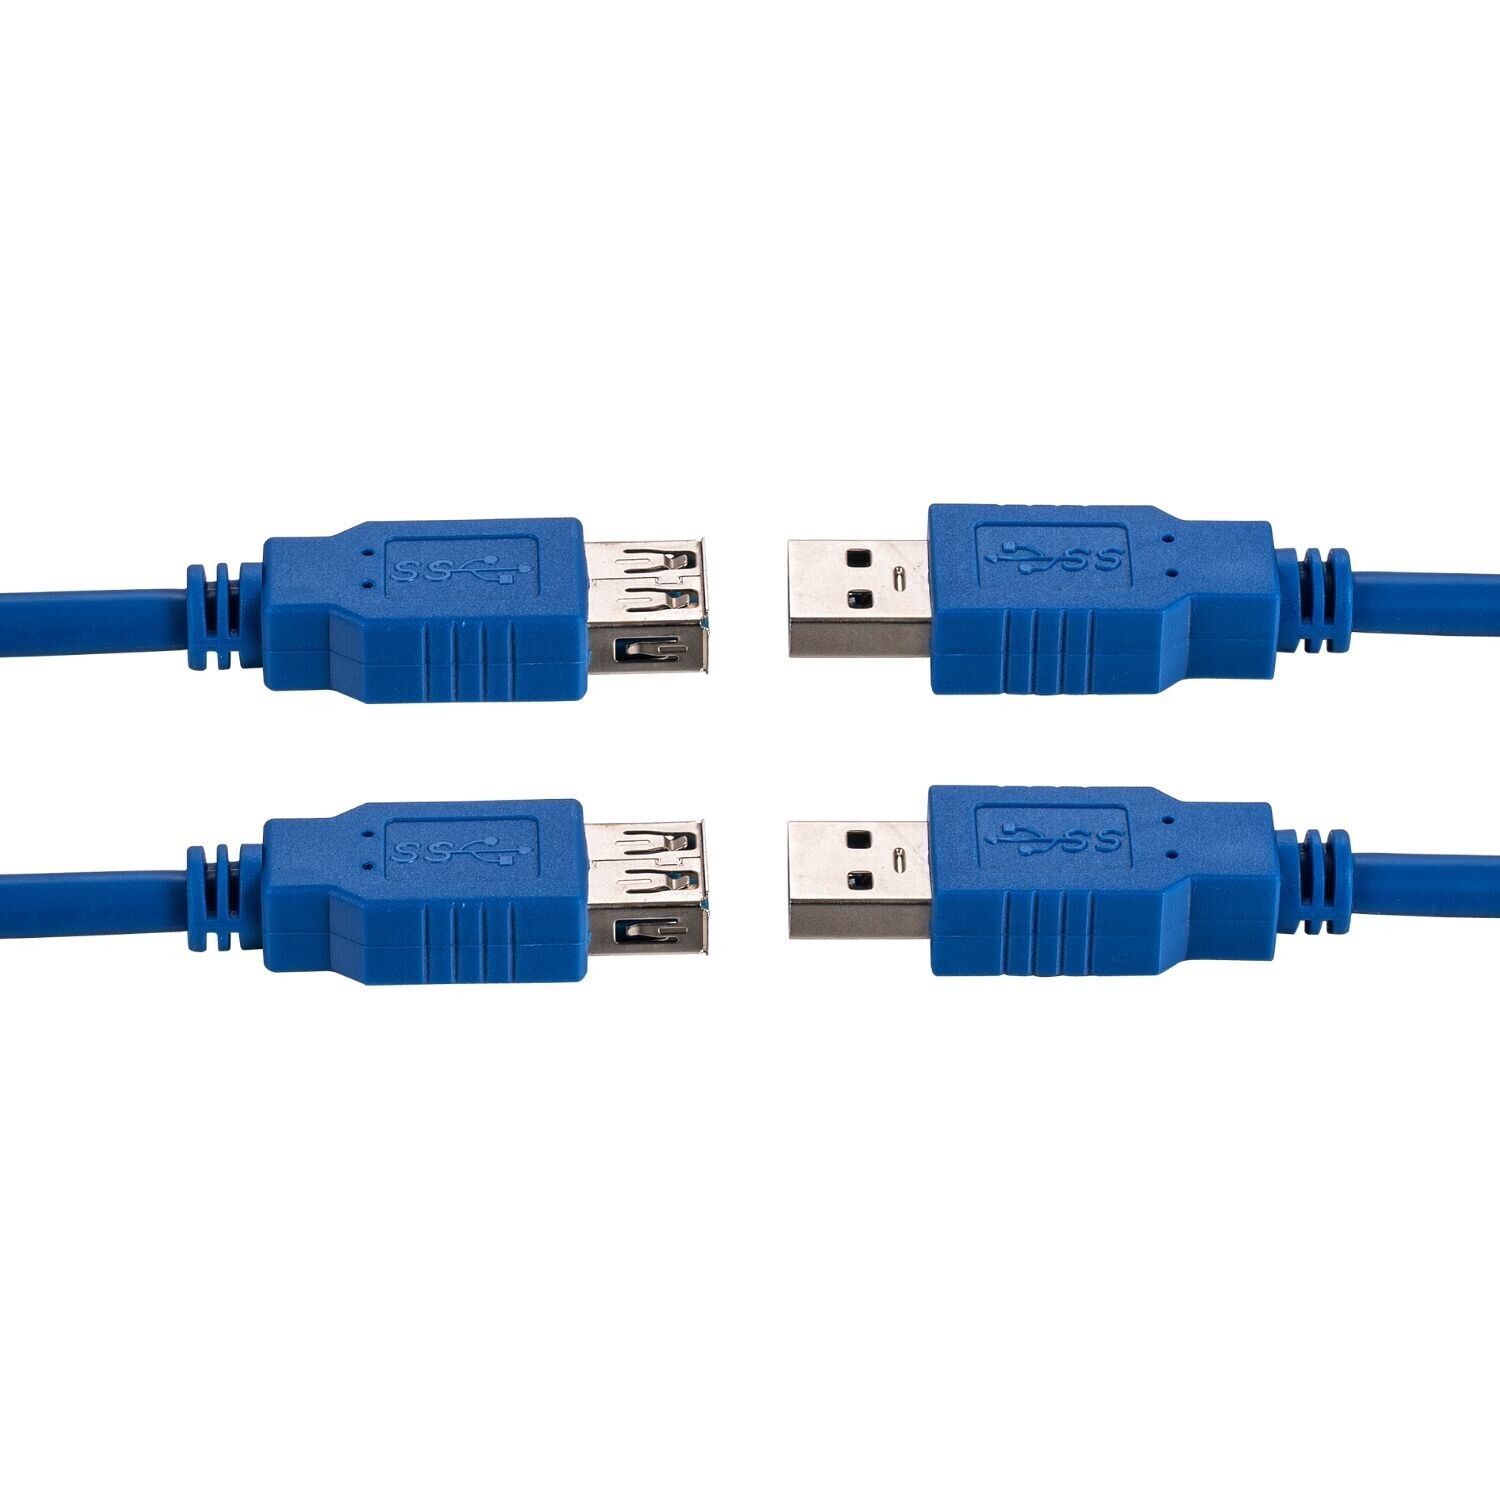 2x 6ft USB 3.0 Extension Cable Type A Male to A Female Extender HIGH SPEED Blue